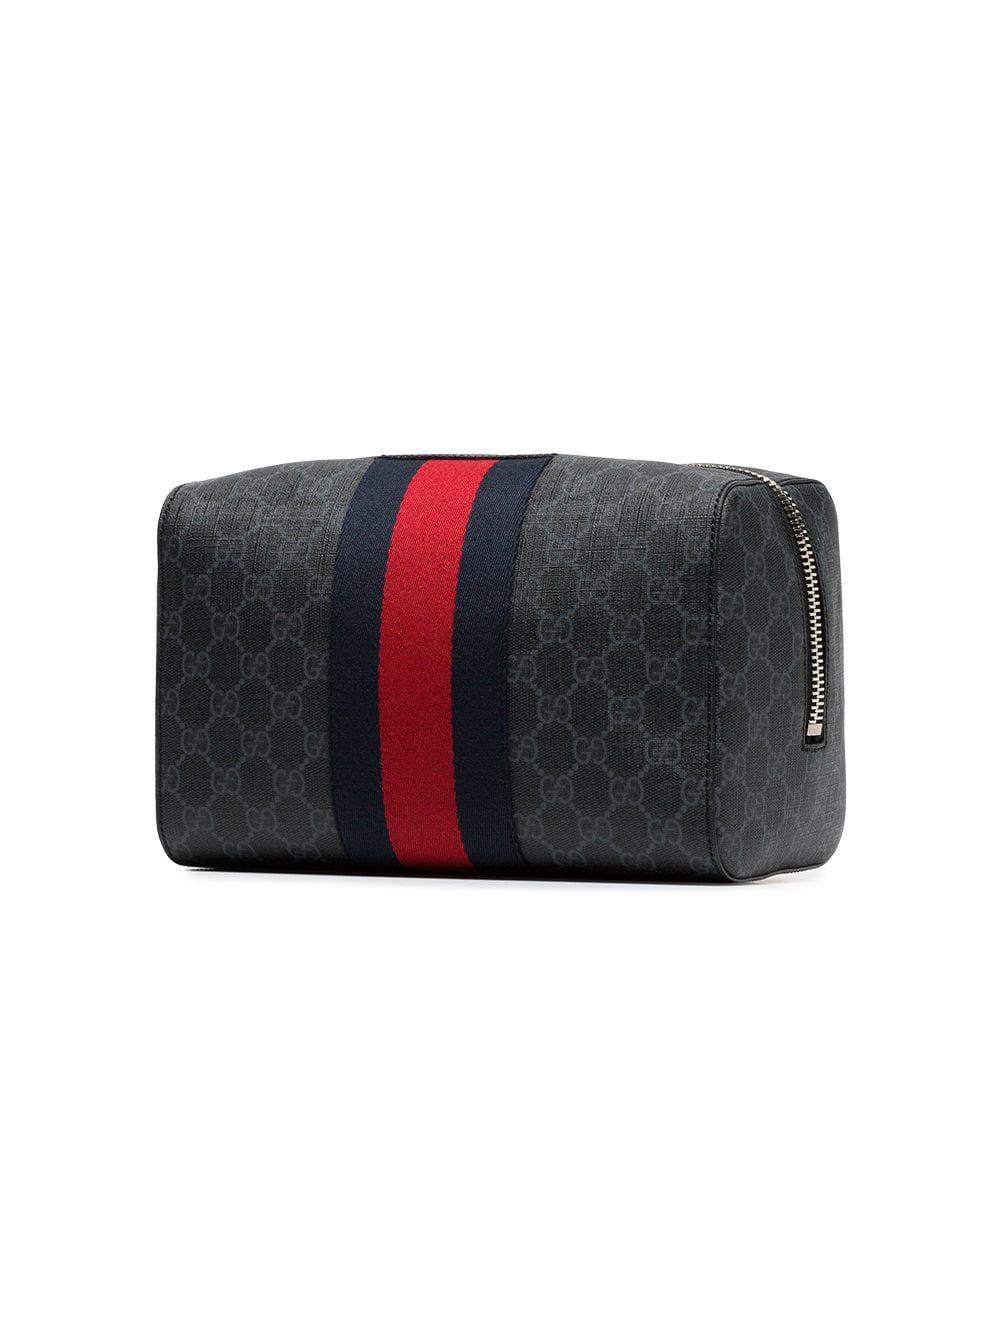 Gucci GG Supreme Wash Bag in Grey (Gray) for Men - Lyst